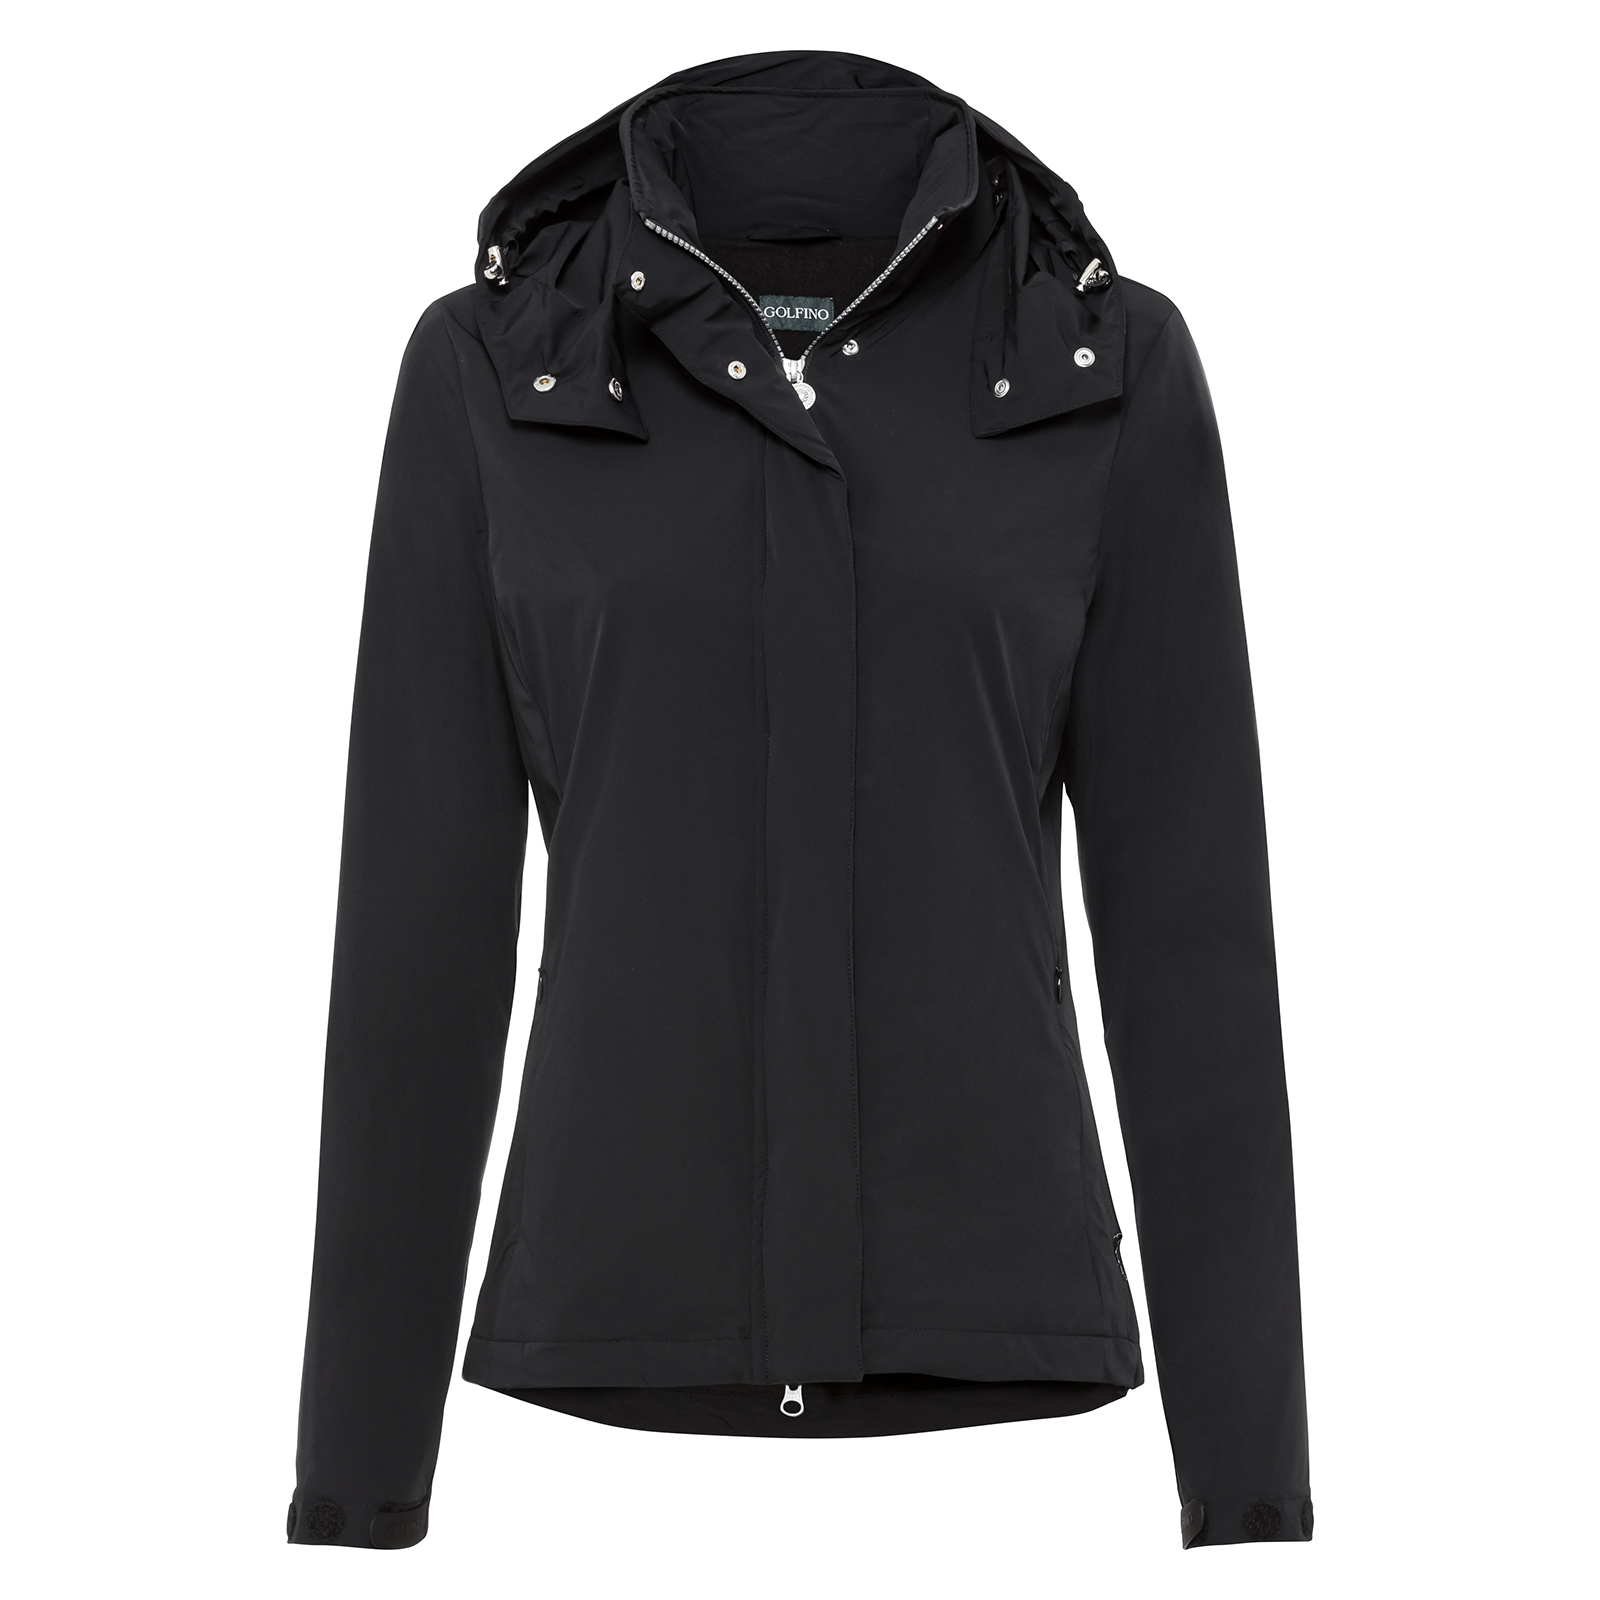 Ladies' windproof golf jacket with cold weather protection and detachable hood